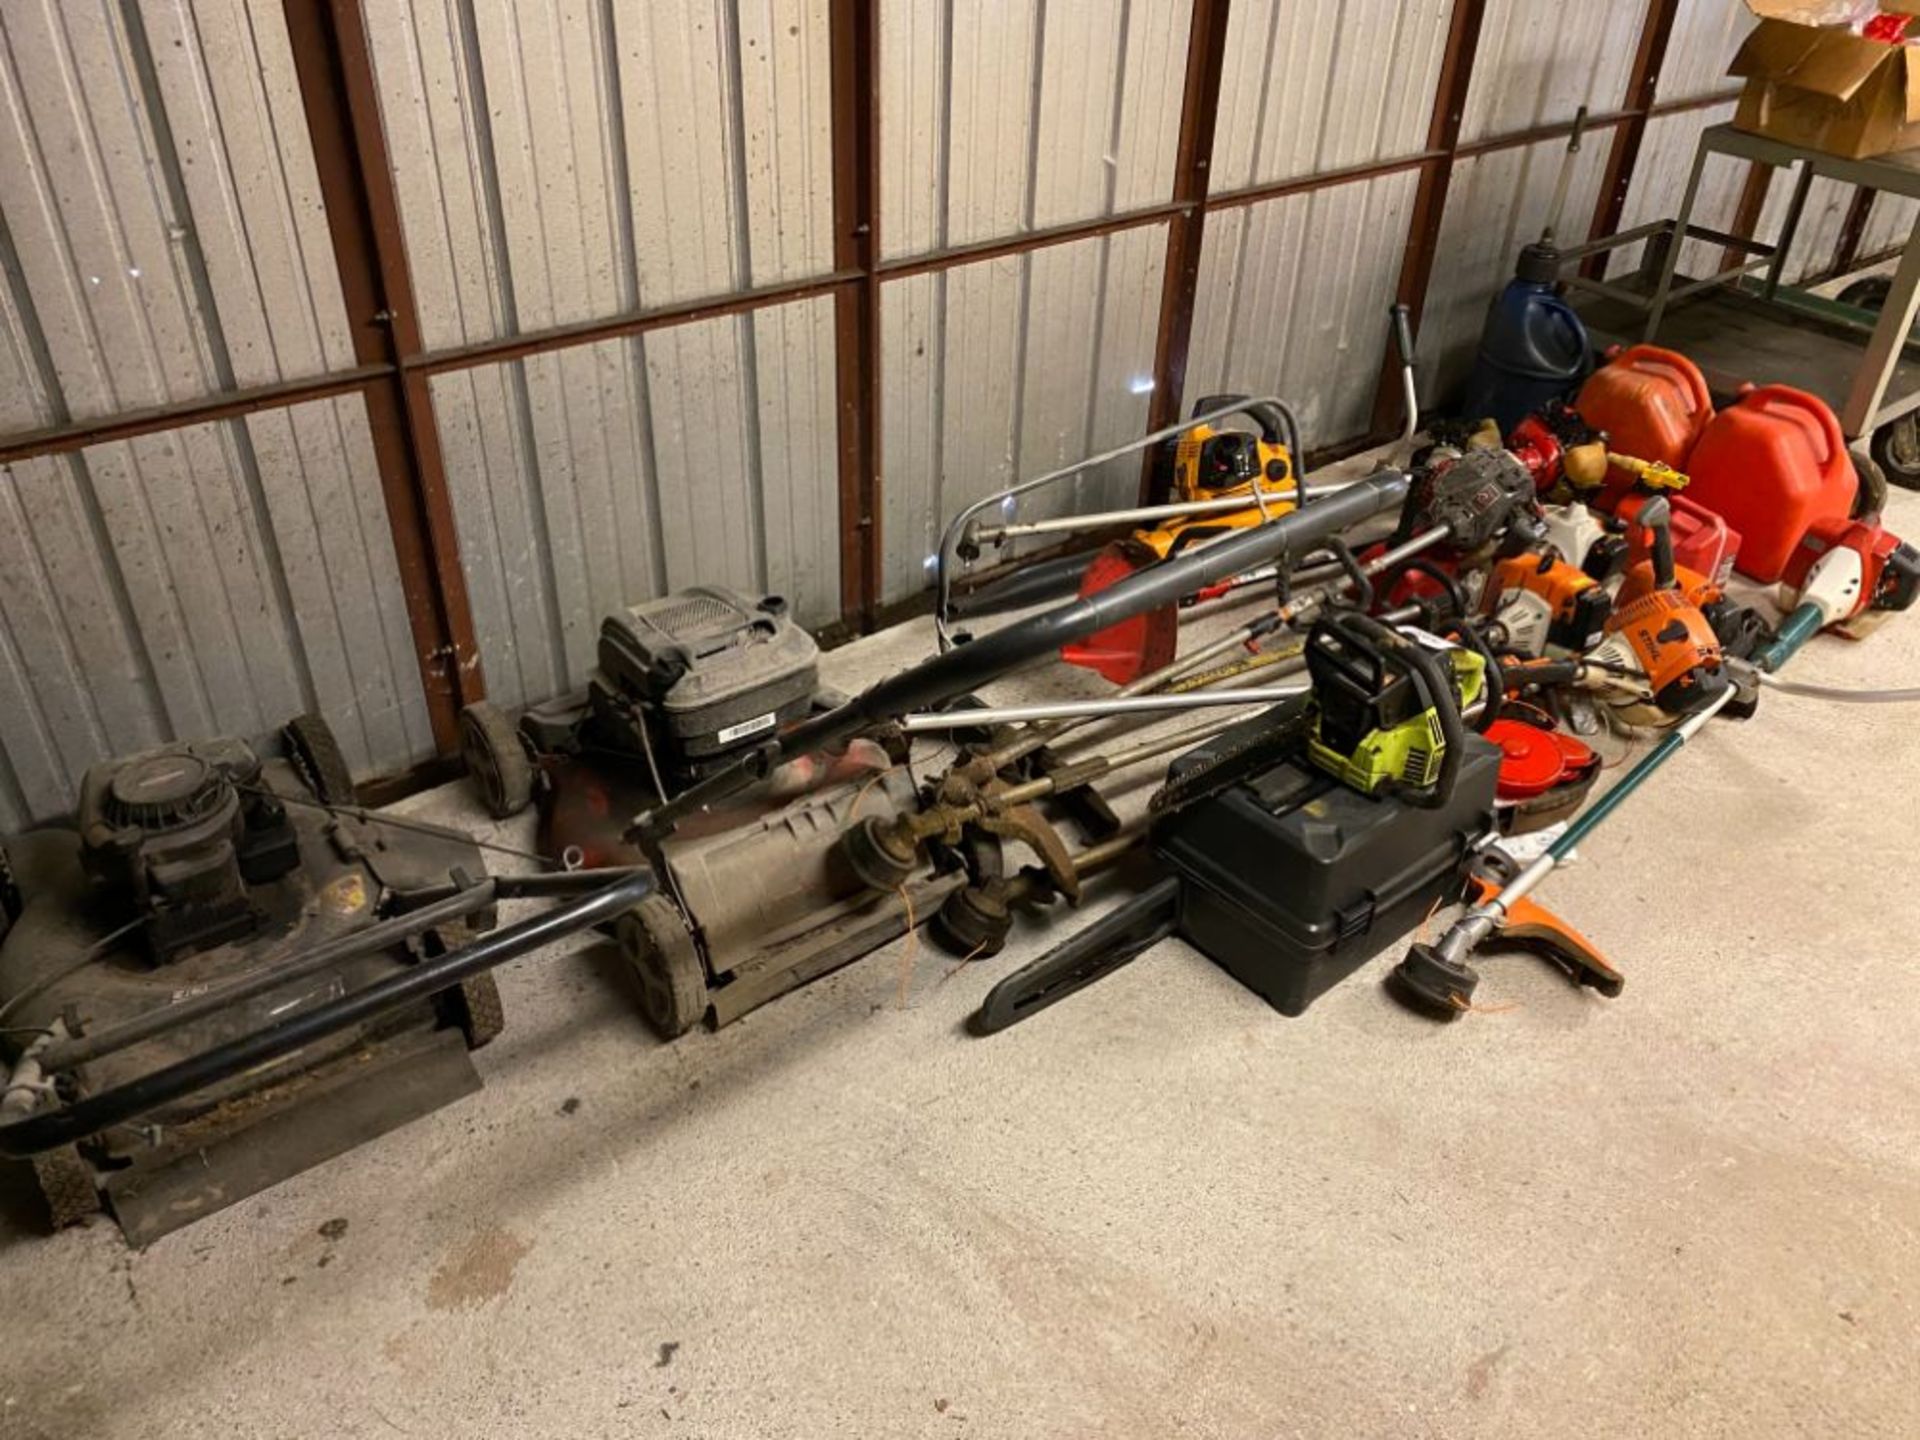 LOT - MISC. LAWNMOWERS, WEED EATERS & CHAINSAWS